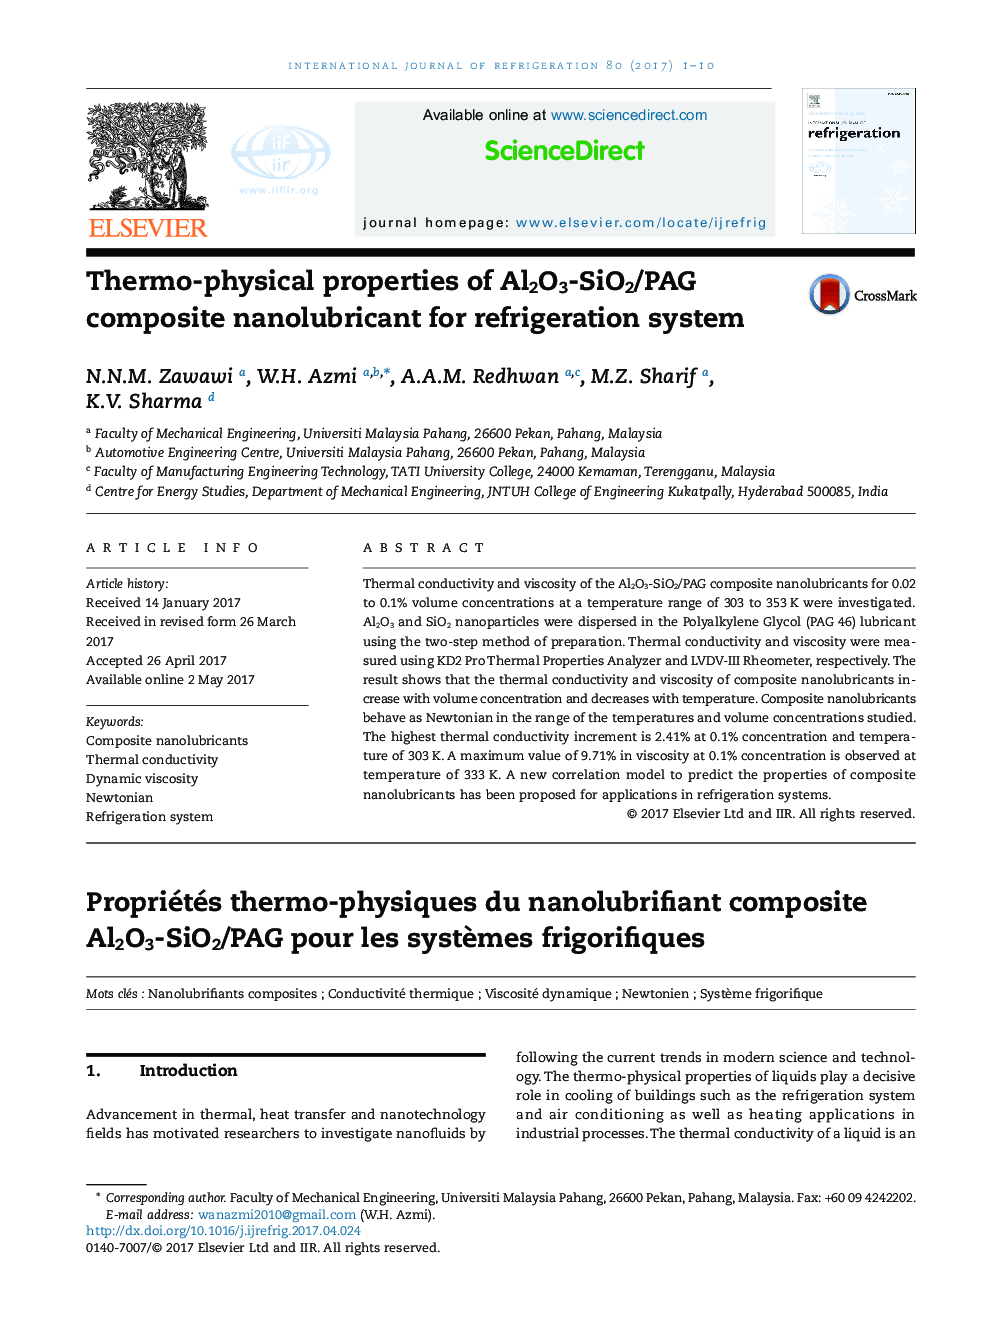 Thermo-physical properties of Al2O3-SiO2/PAG composite nanolubricant for refrigeration system